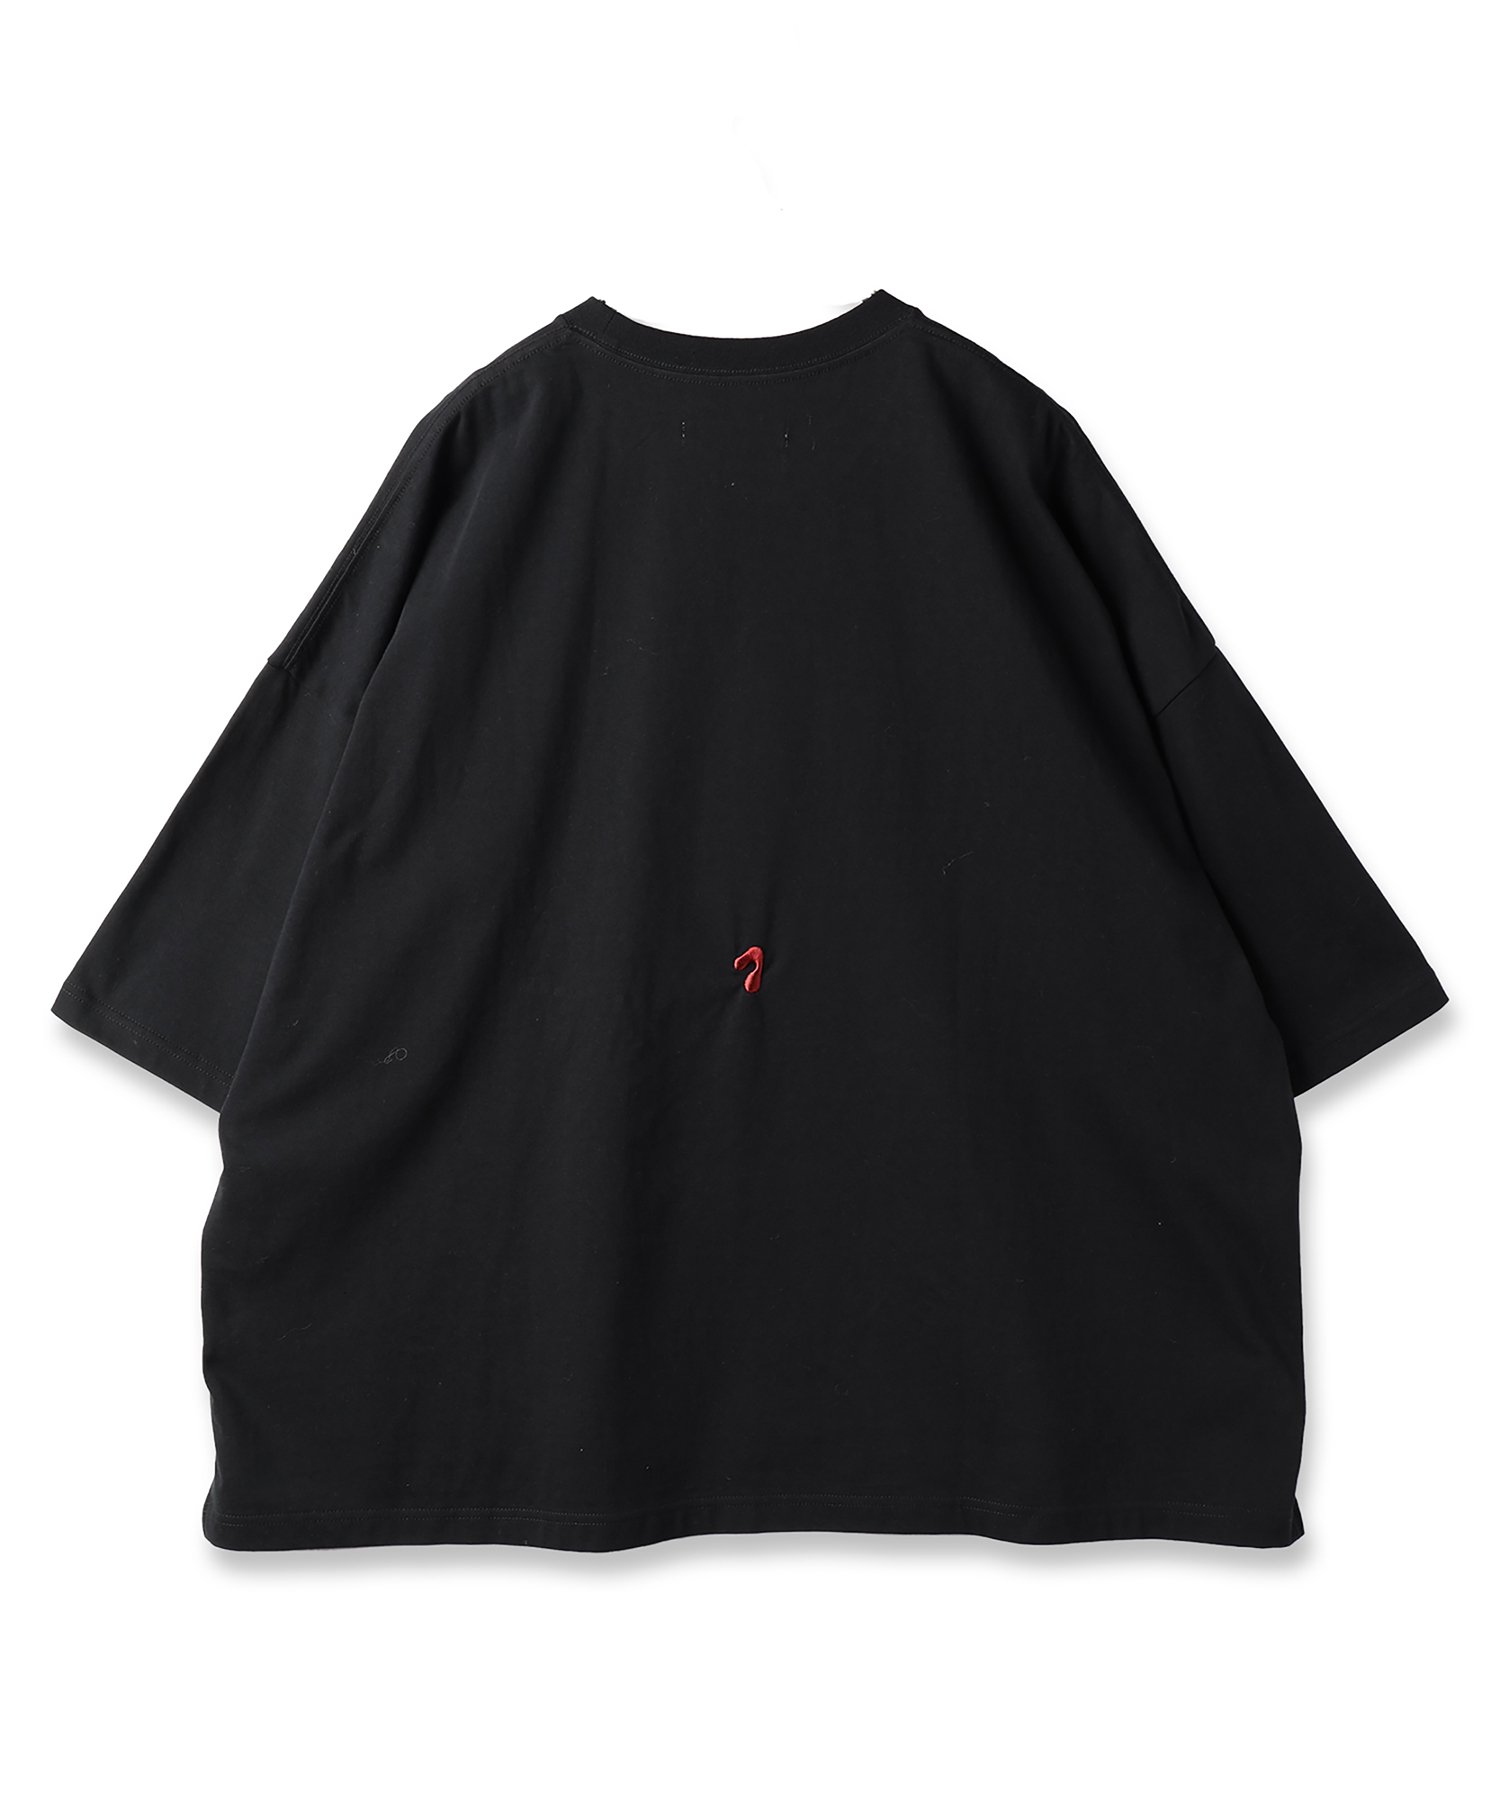 JieDa<br />Debut OVER SIZE TEE / BLACK<img class='new_mark_img2' src='https://img.shop-pro.jp/img/new/icons47.gif' style='border:none;display:inline;margin:0px;padding:0px;width:auto;' />